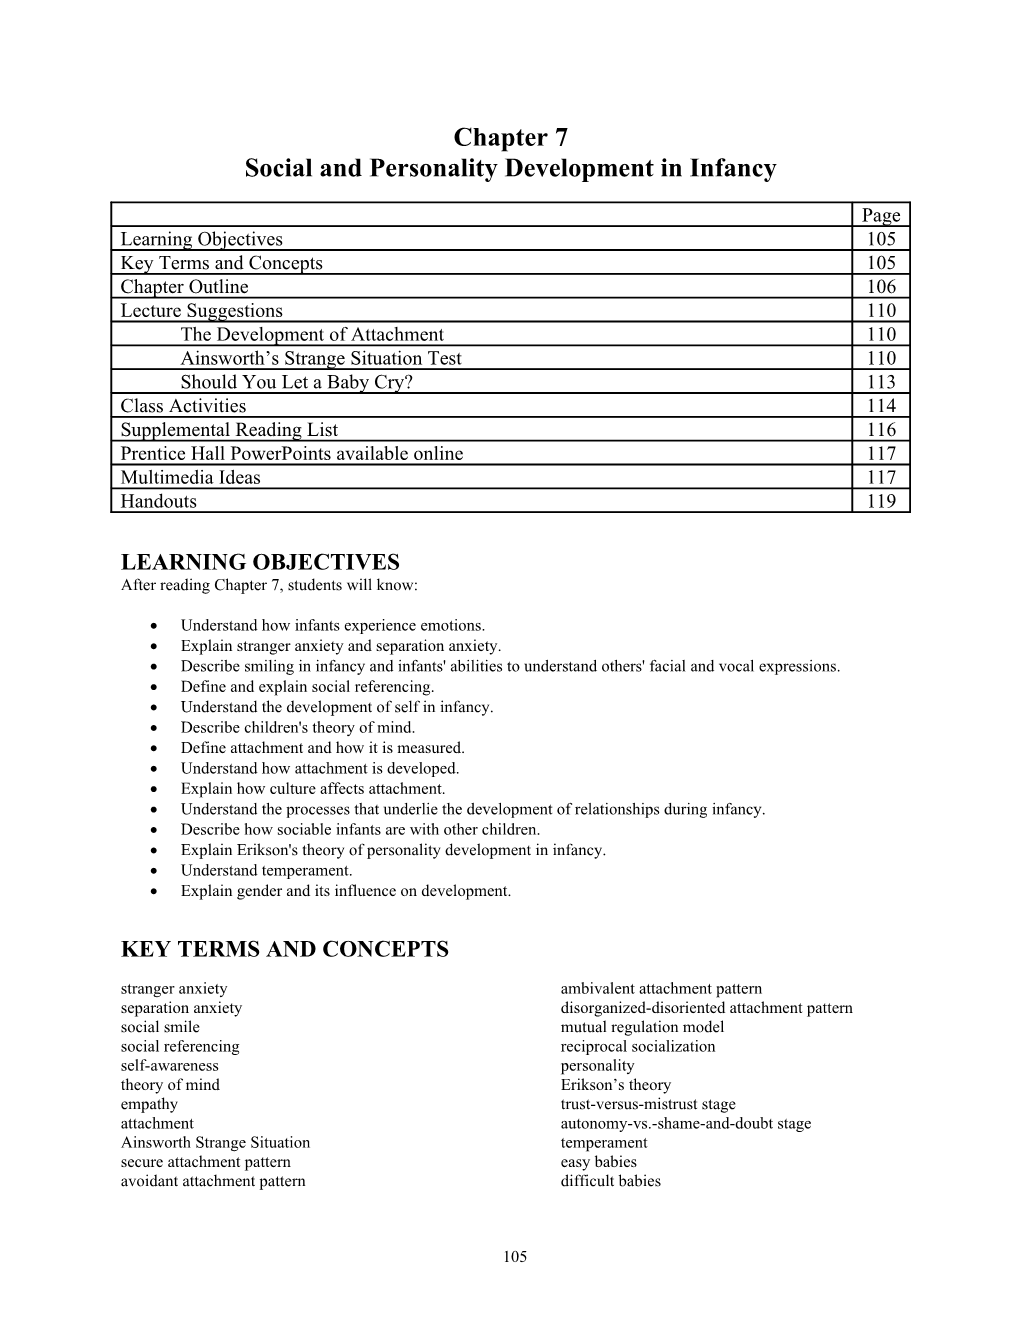 Social and Personality Development in Infancy